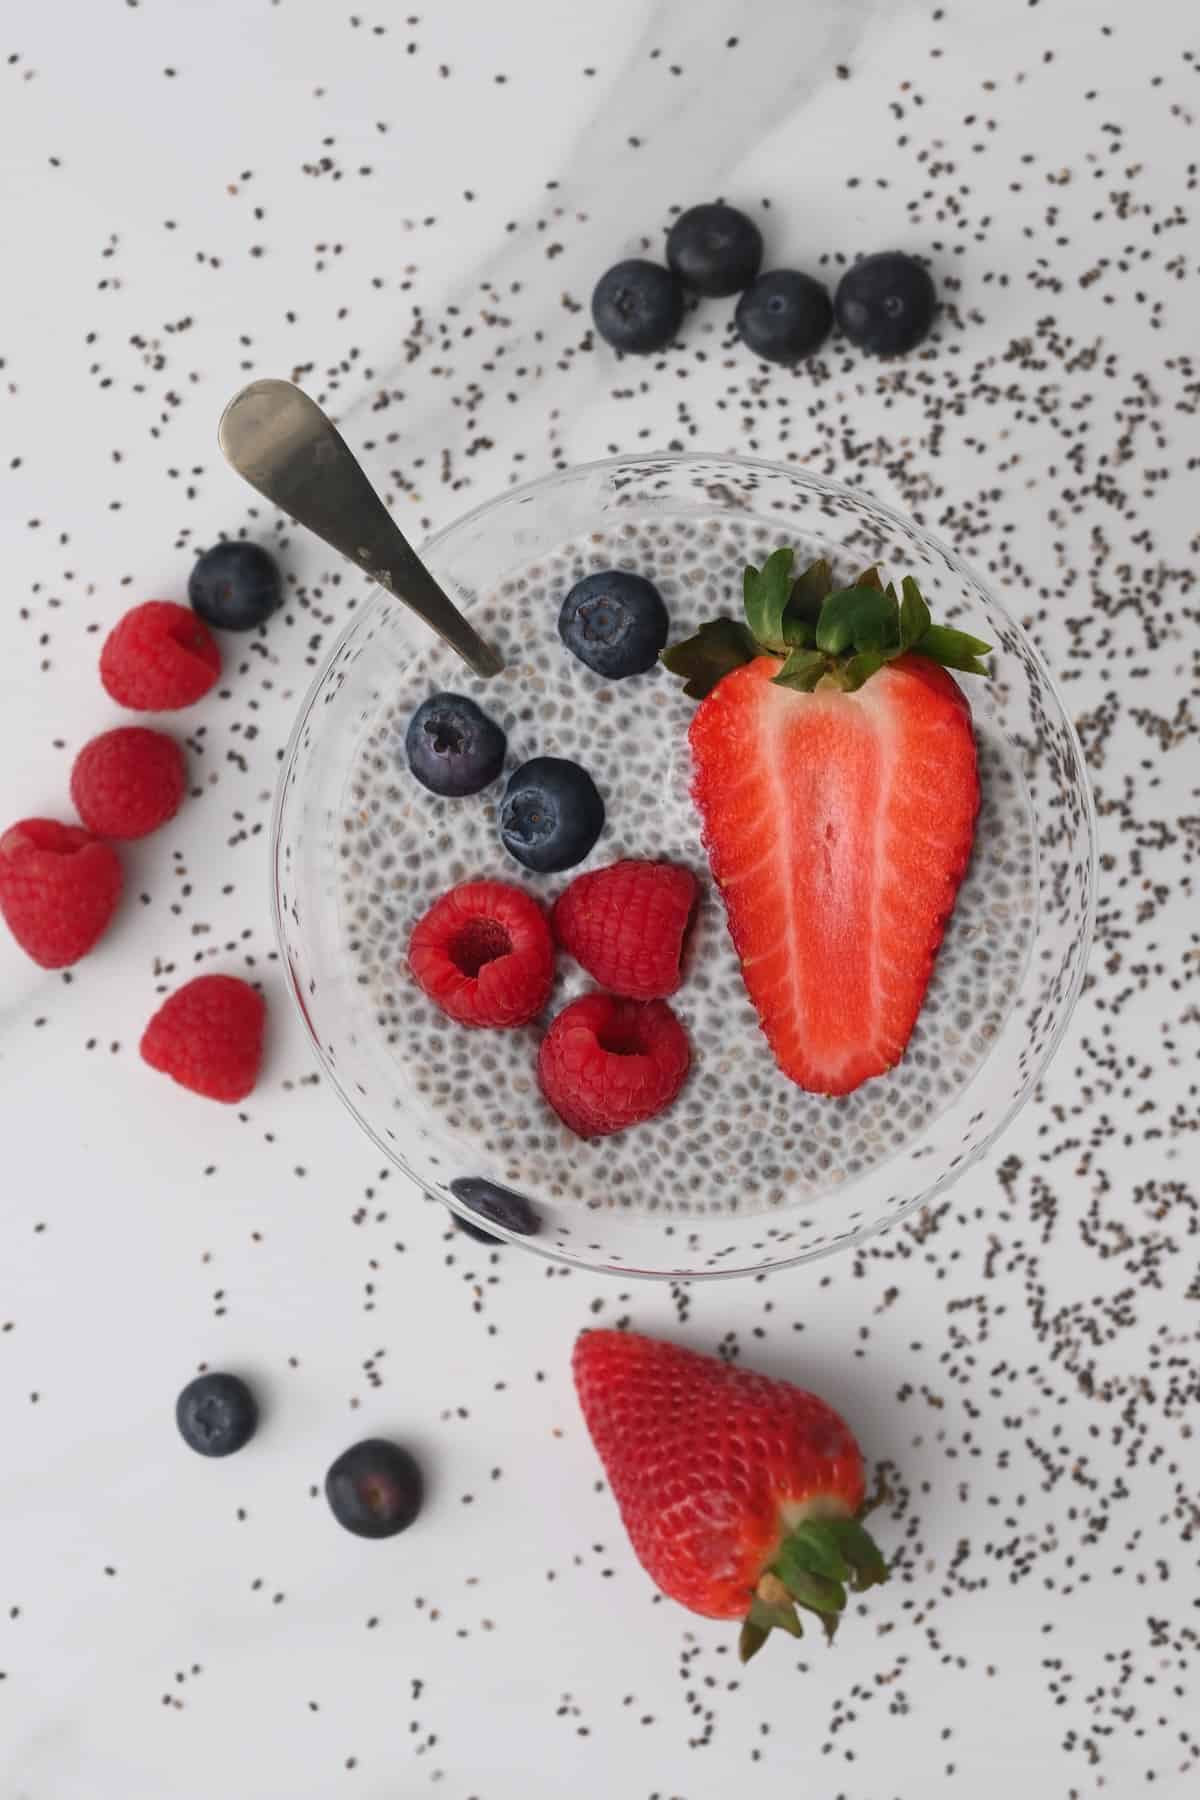 Chia pudding in a bowl topped with mixed berries